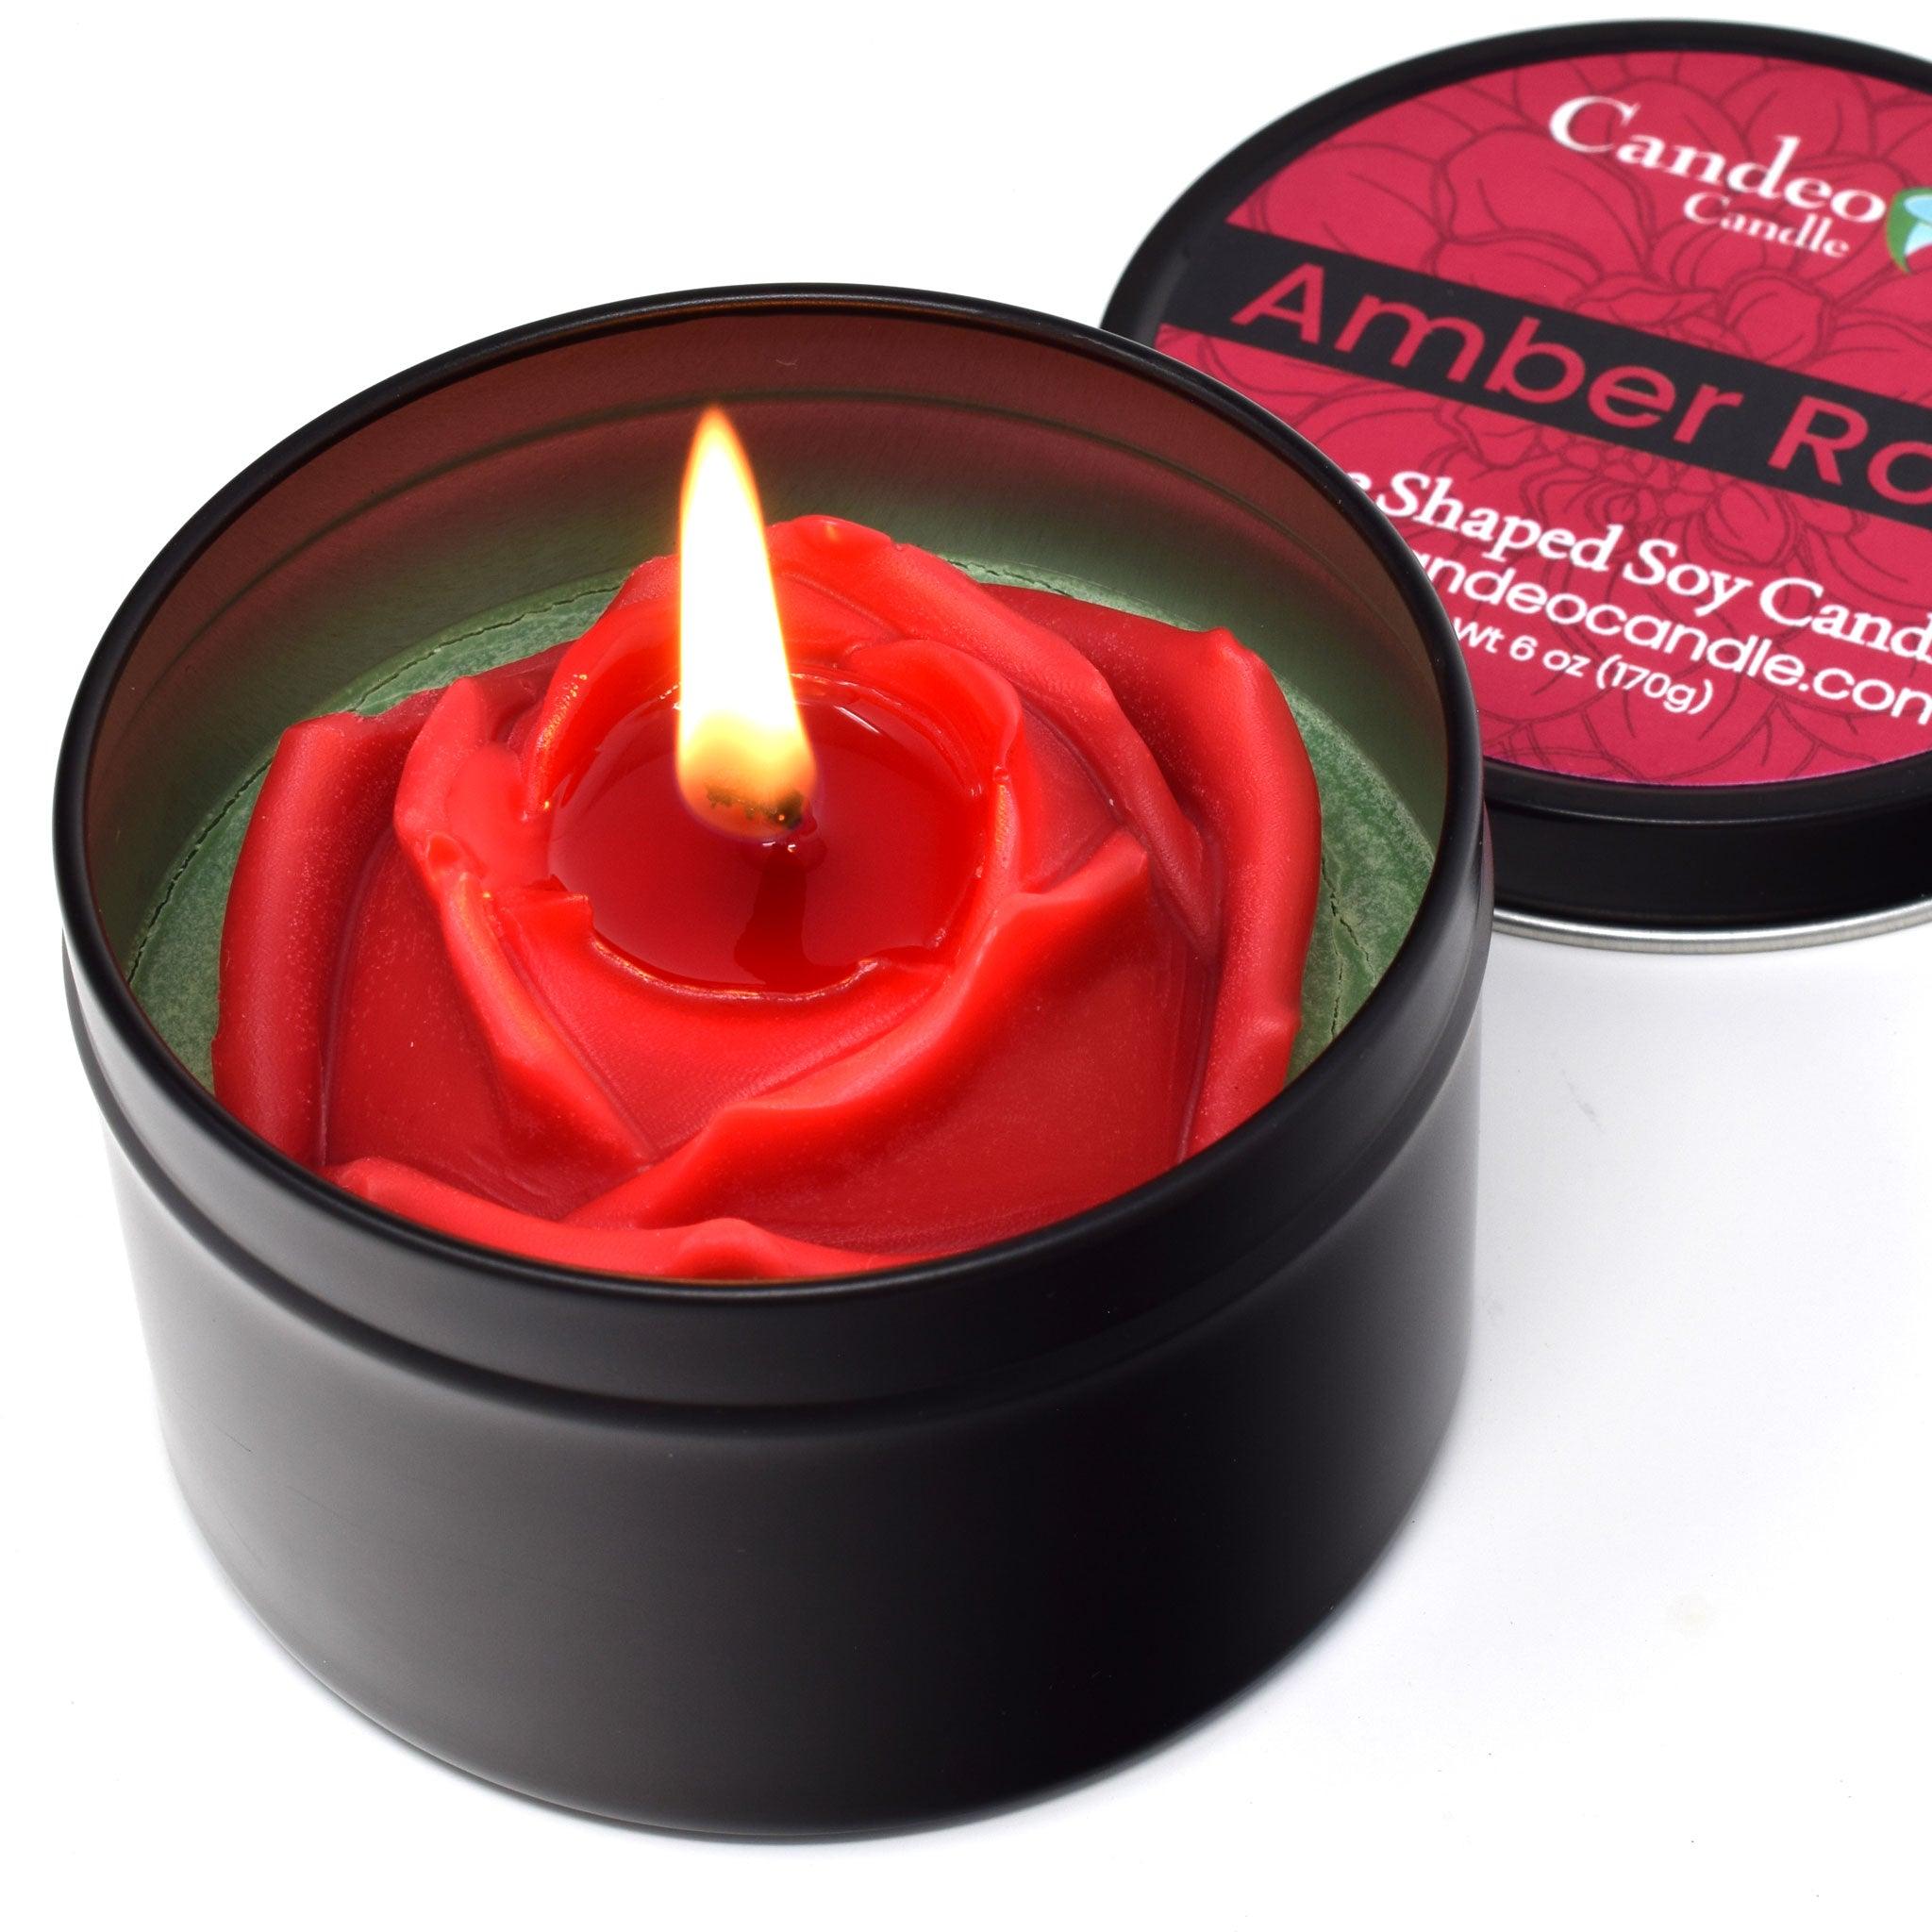 Rose Shaped Soy Candle, Amber Rose Scented, 6oz Soy Candle Tin - Candeo Candle